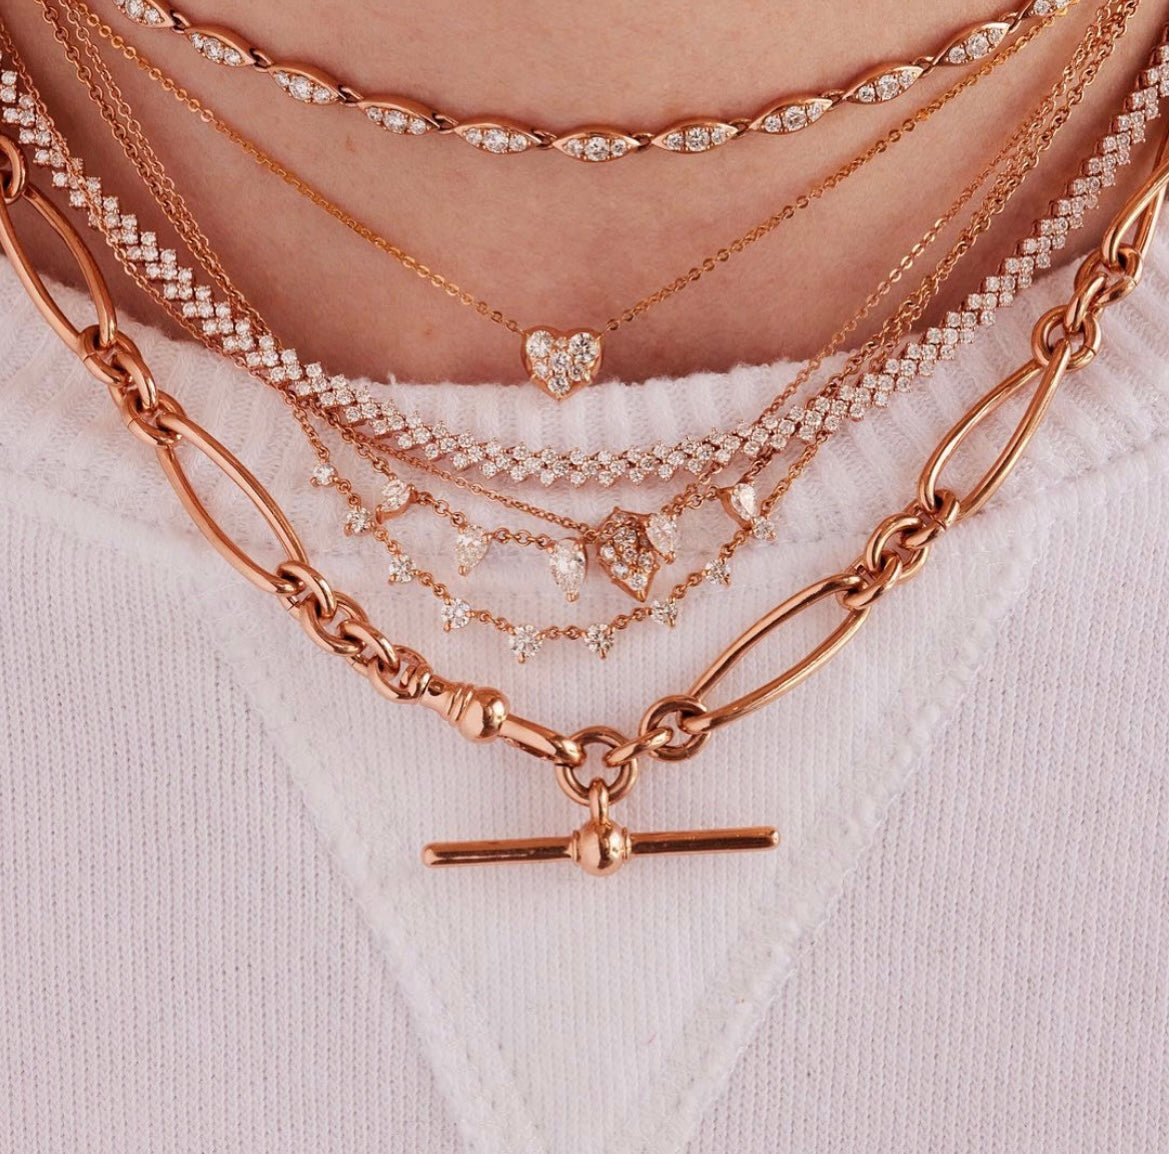 Chevron Tennis Necklace shown in Rose Gold.